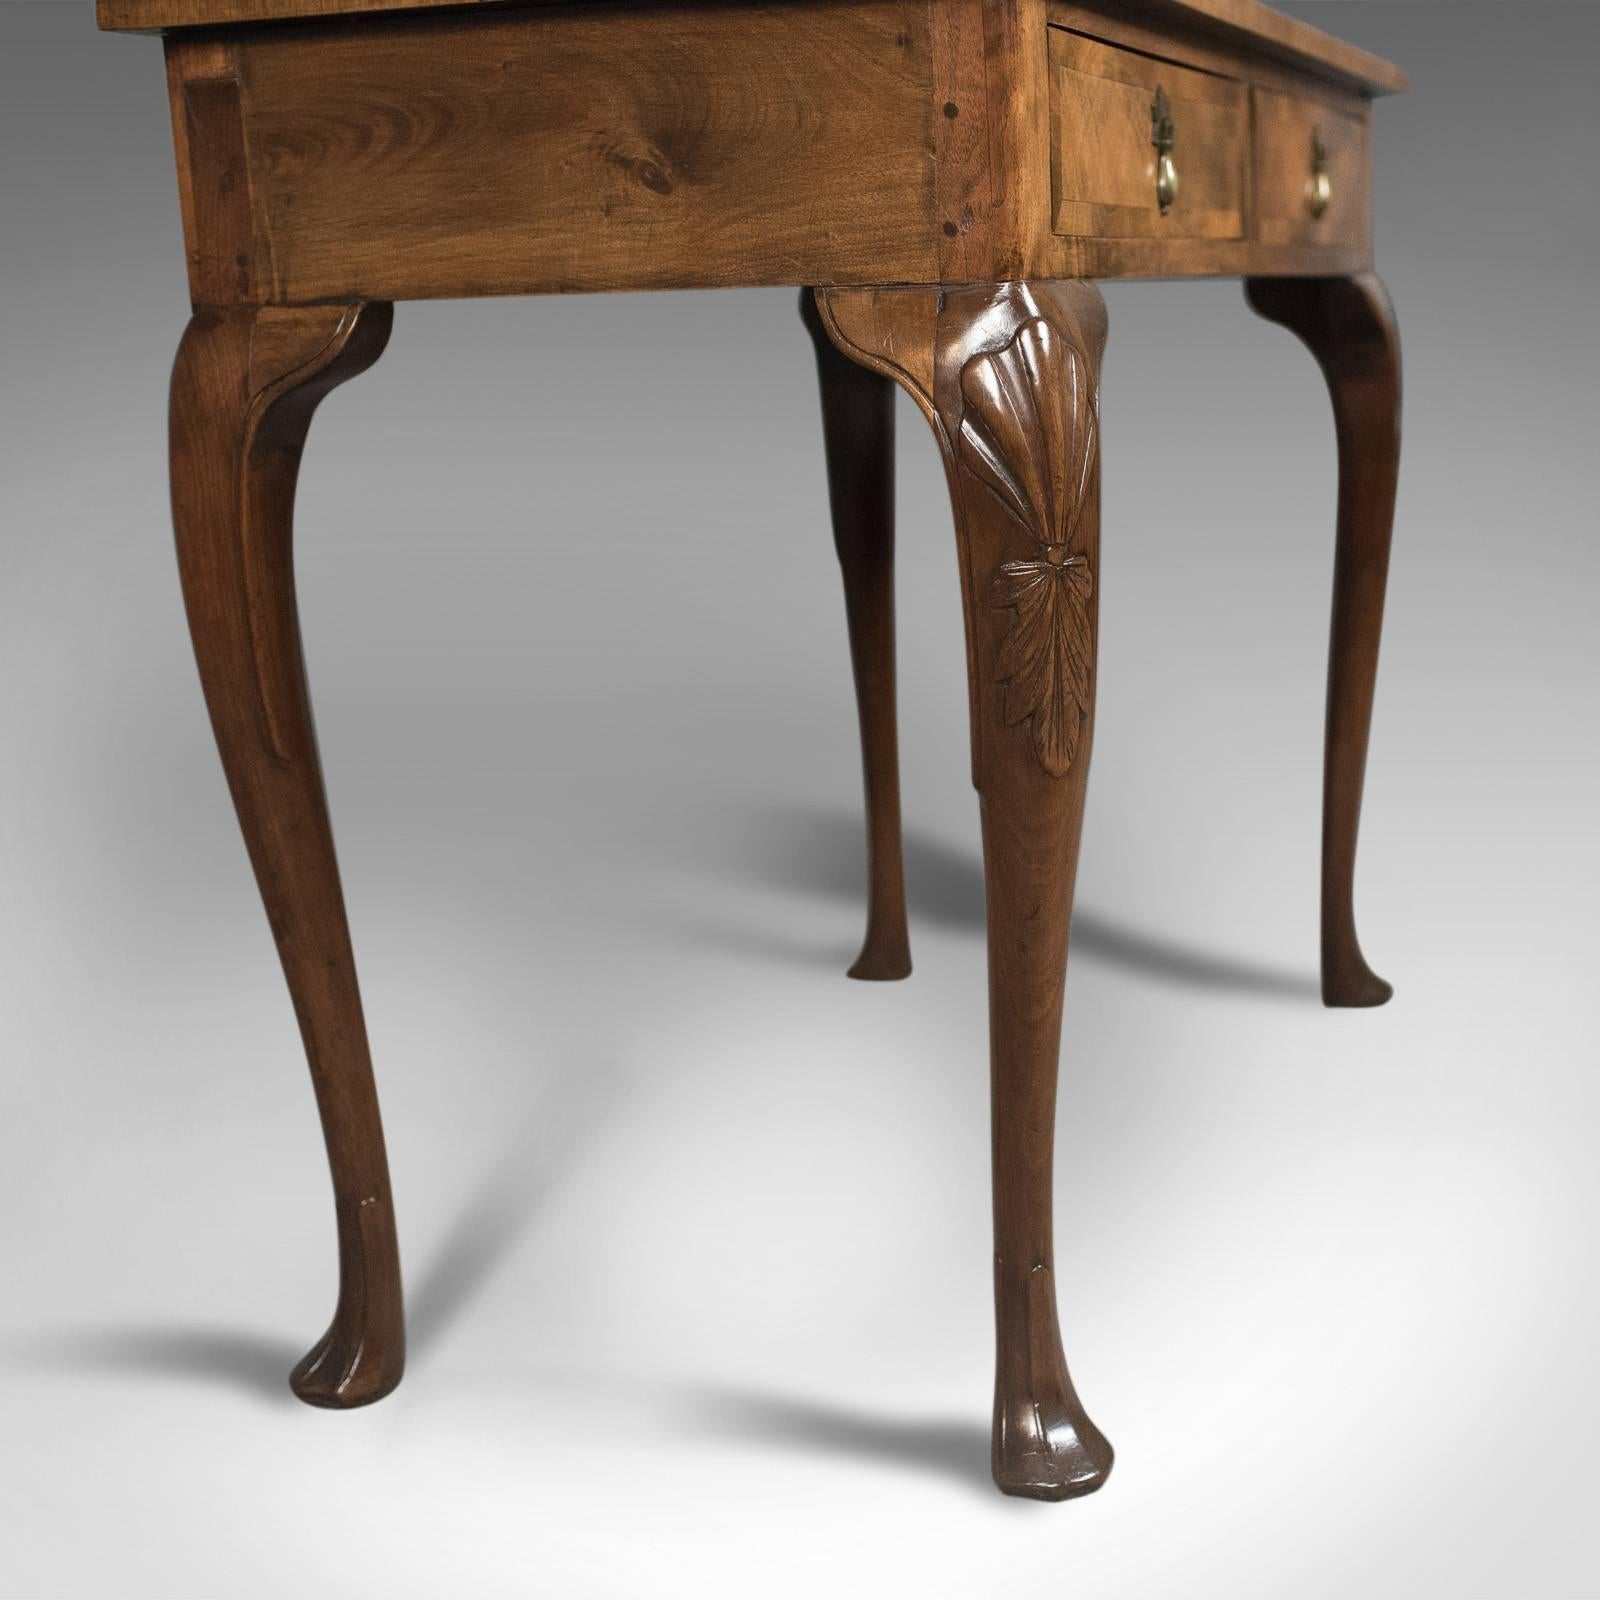 Edwardian Antique Side Table with Drawers, English, Walnut, circa 1910 3